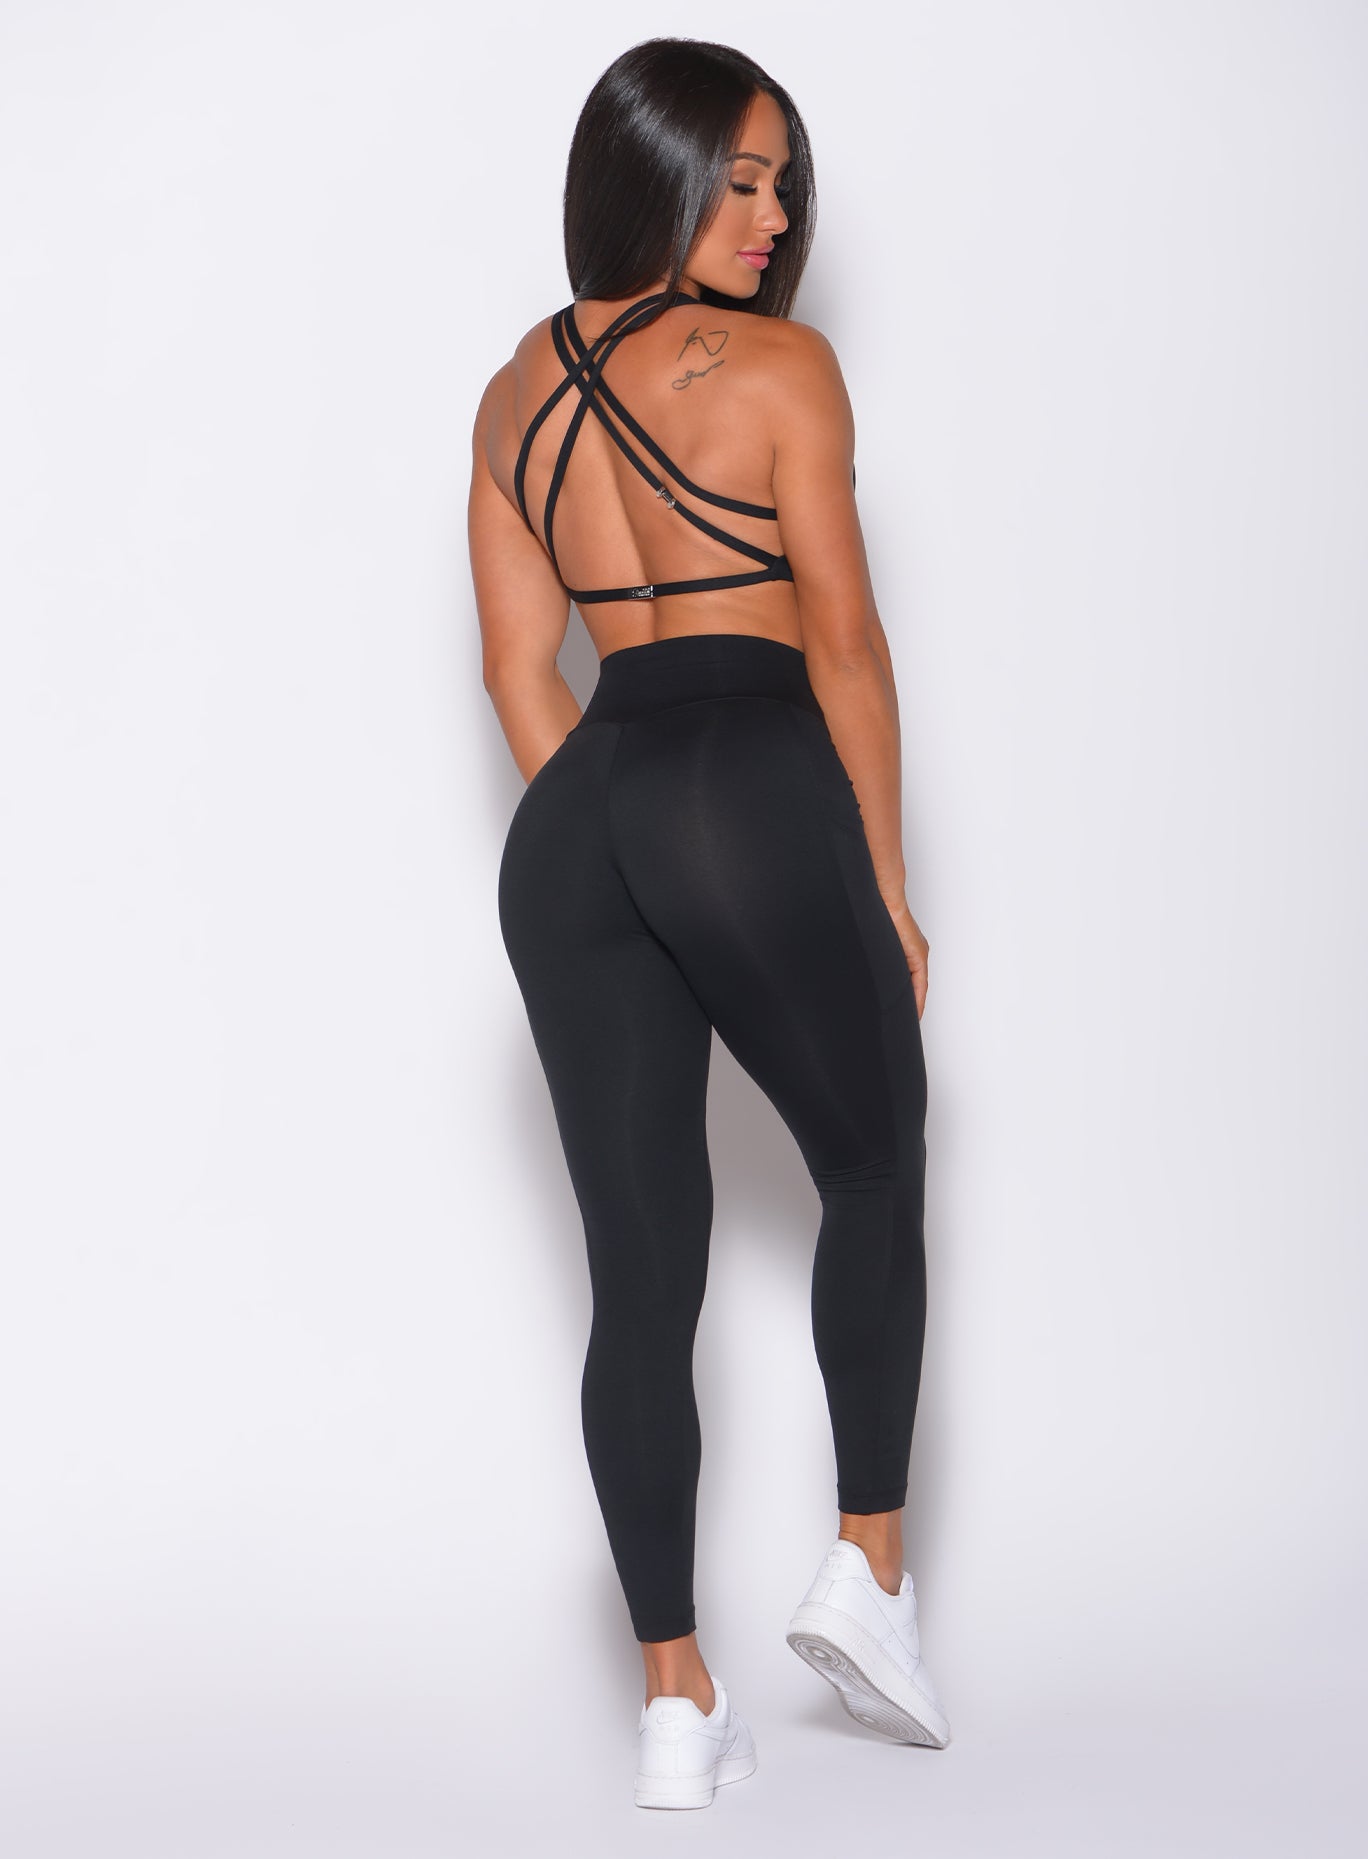 Back profile view of a model in our black barbell leggings and a matching bra 